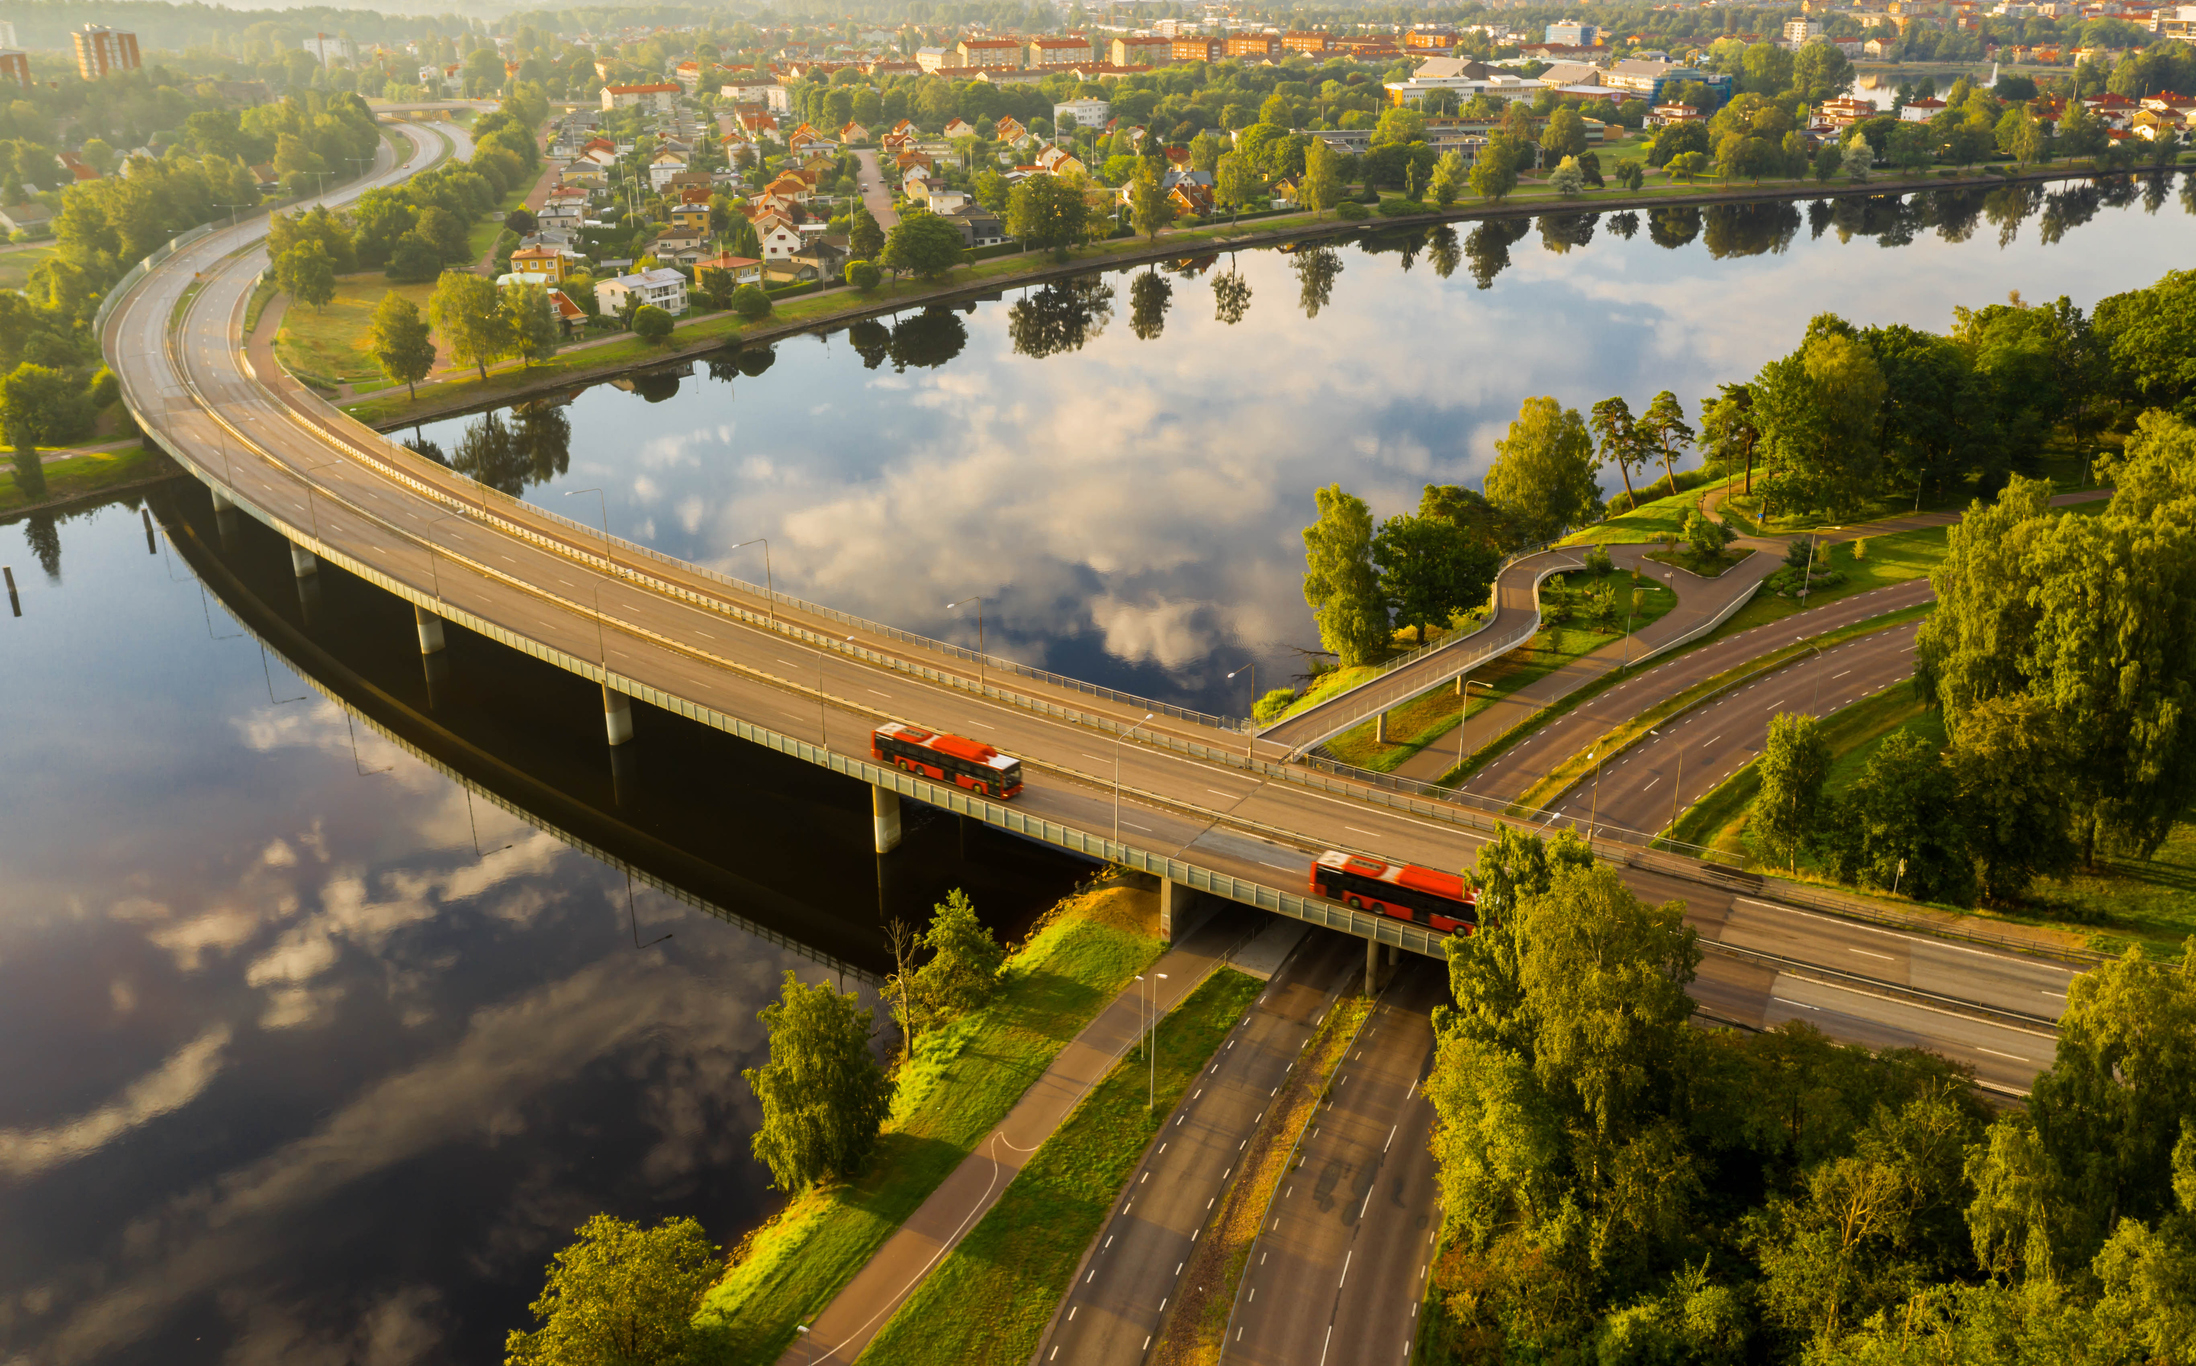 Aerial view of a bridge over a river with a red train crossing, adjacent roads, and surrounding greenery